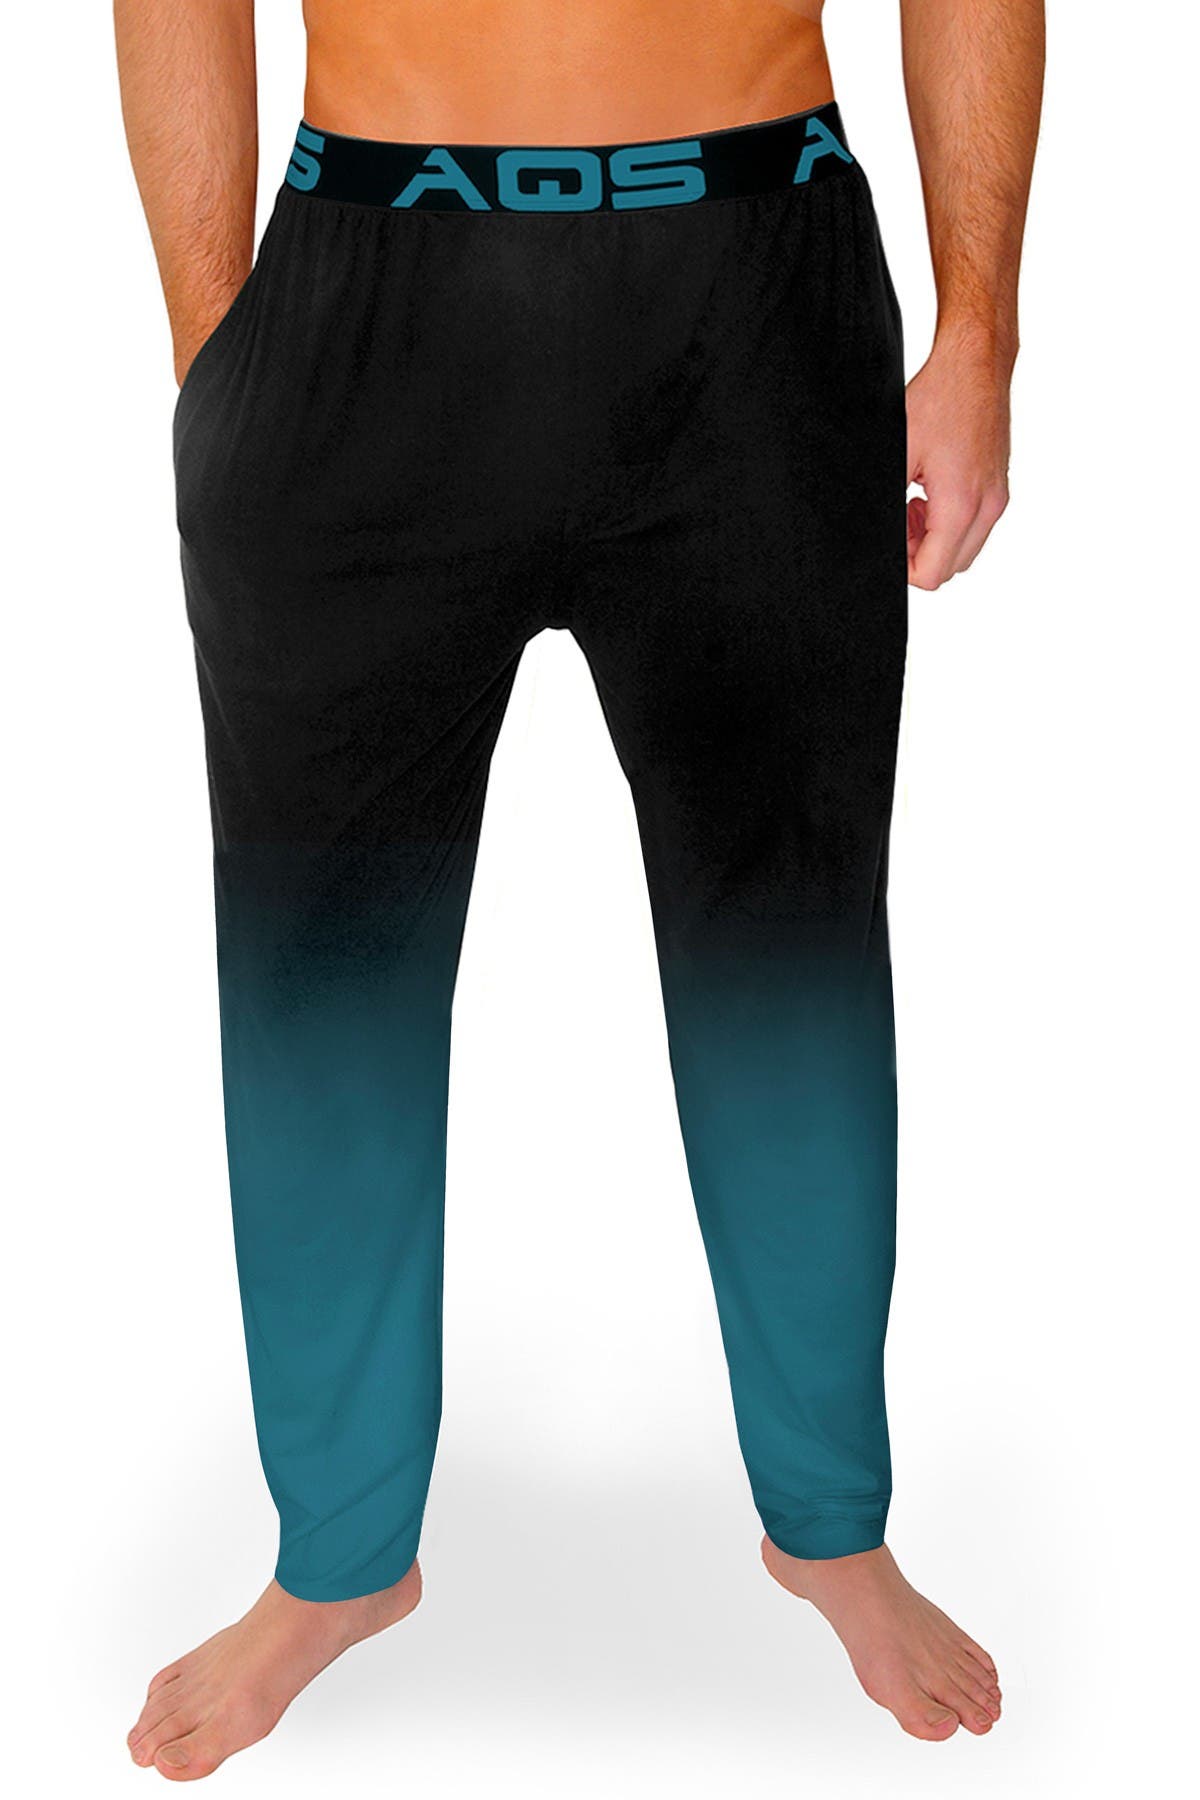 Aqs Ombre Lounge Pants In Black/teal Ombre